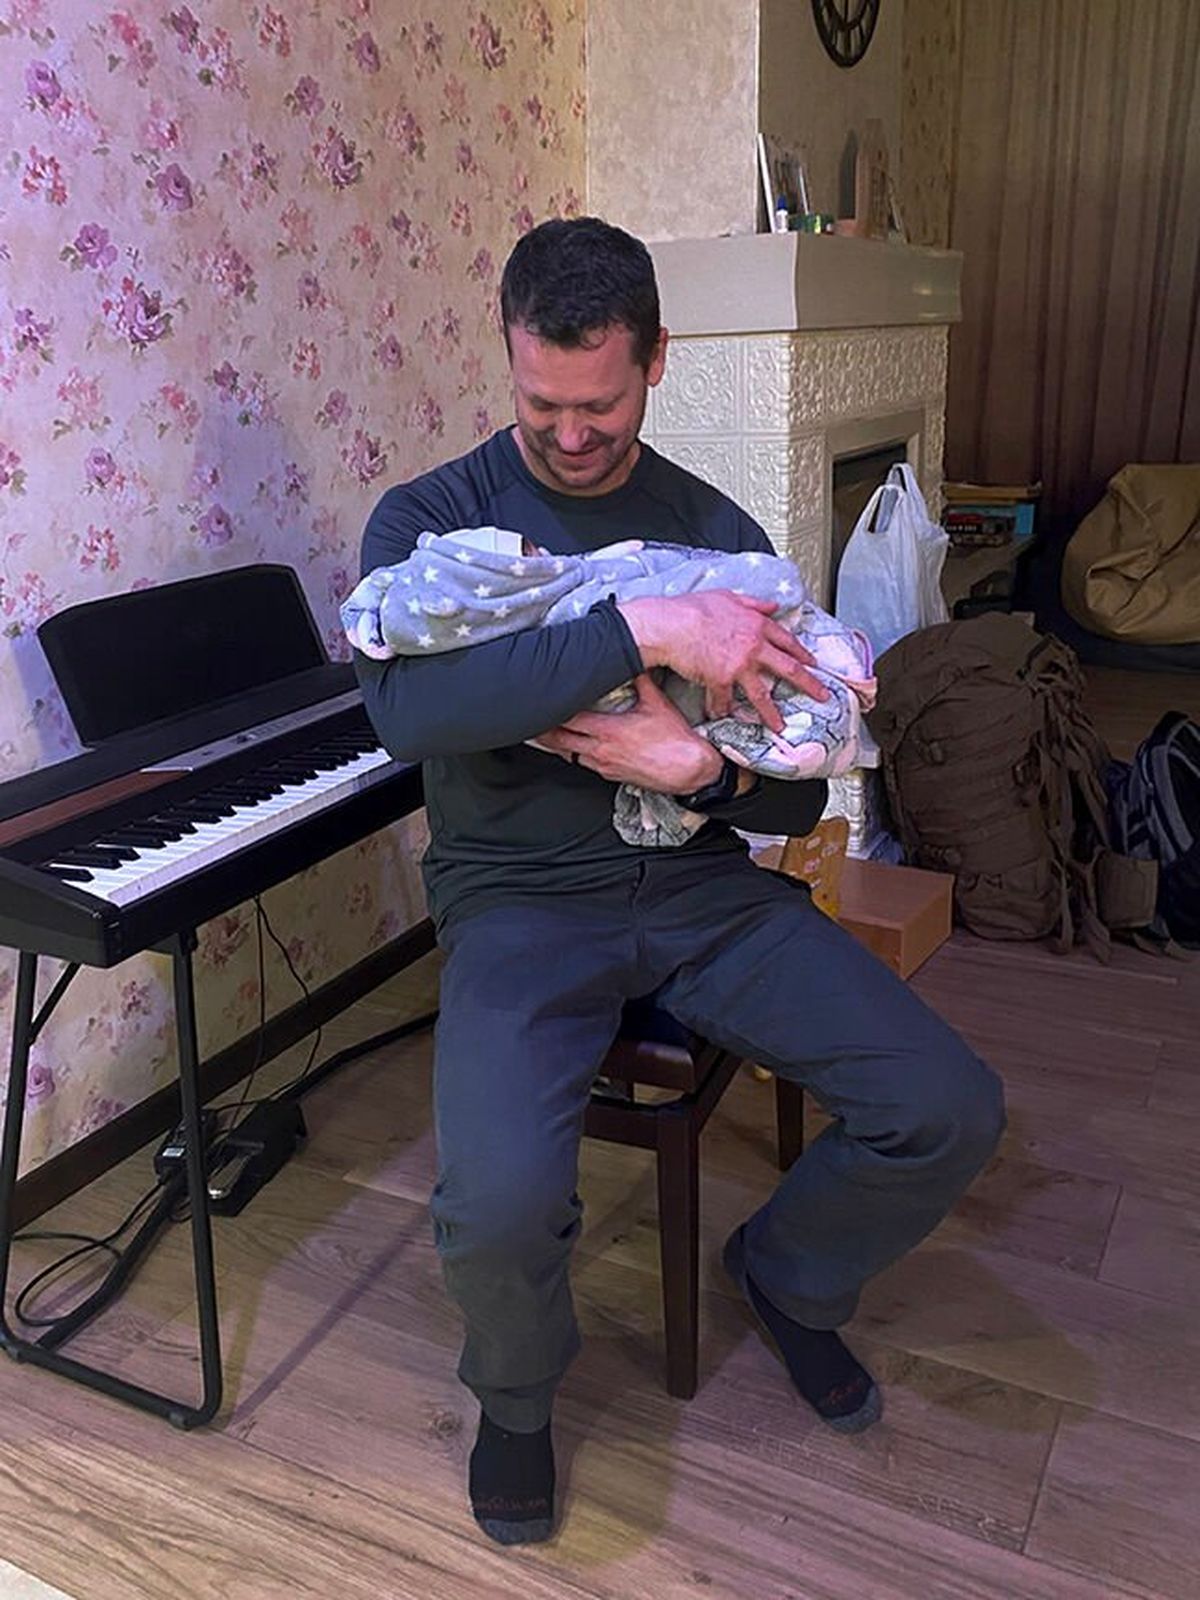 Jared Malone holds a 2-month-old girl who had just escaped from Mariupol, Ukraine, on March 29. Malone nicknamed the girl the “Princess of Mariupol” and said she “saved me that night; I was struggling.”  (Courtesy of Jared Malone)